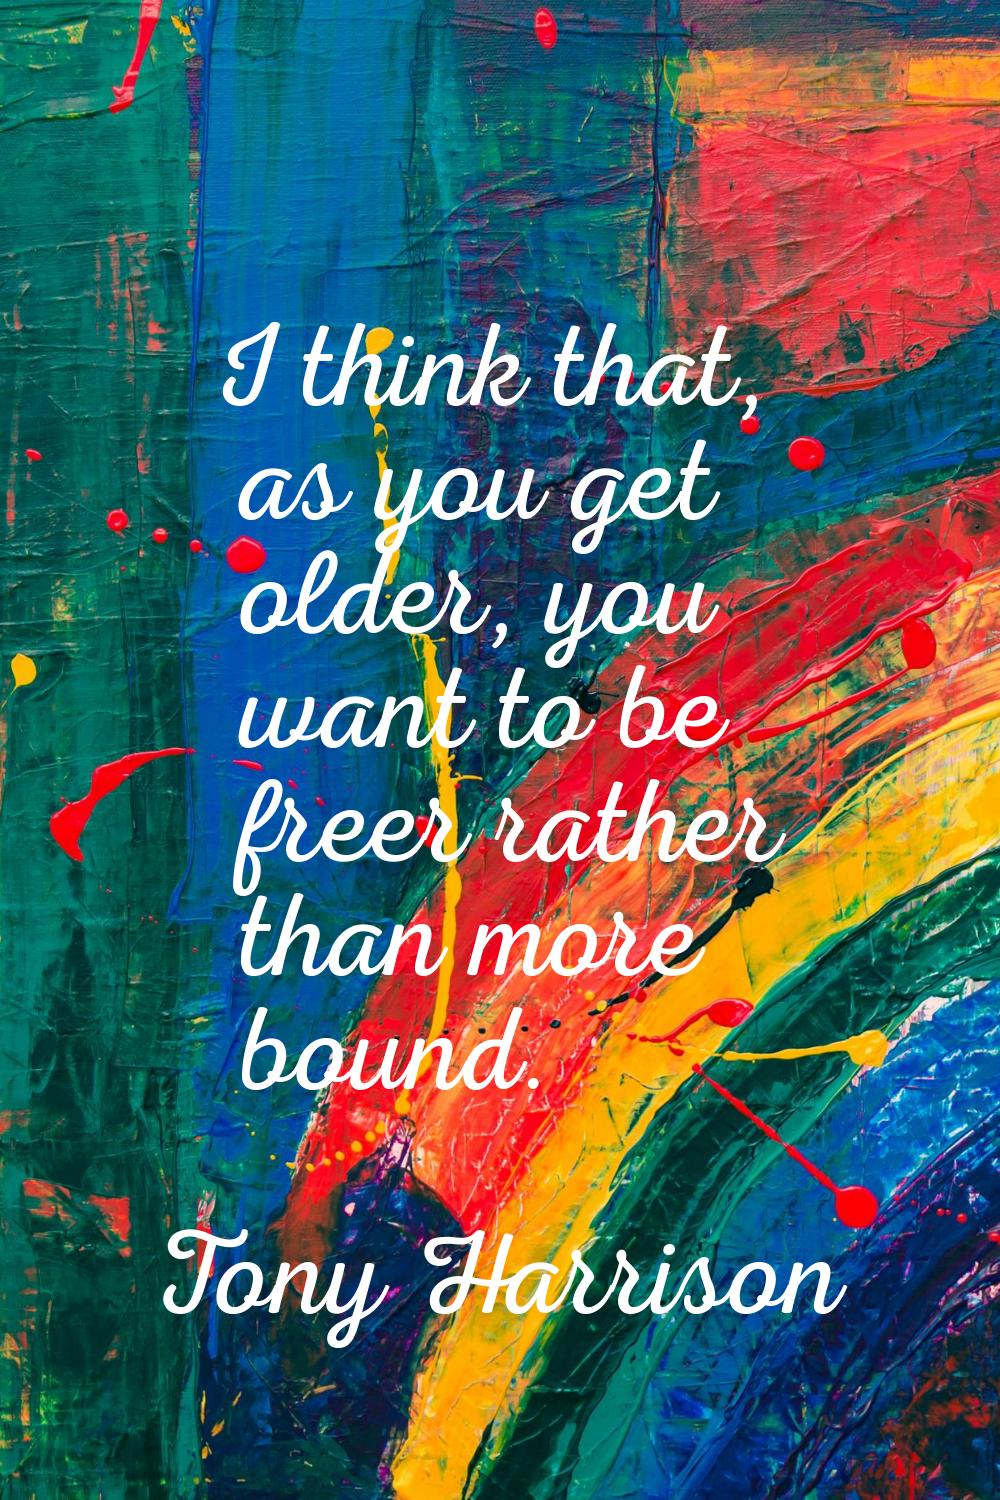 I think that, as you get older, you want to be freer rather than more bound.